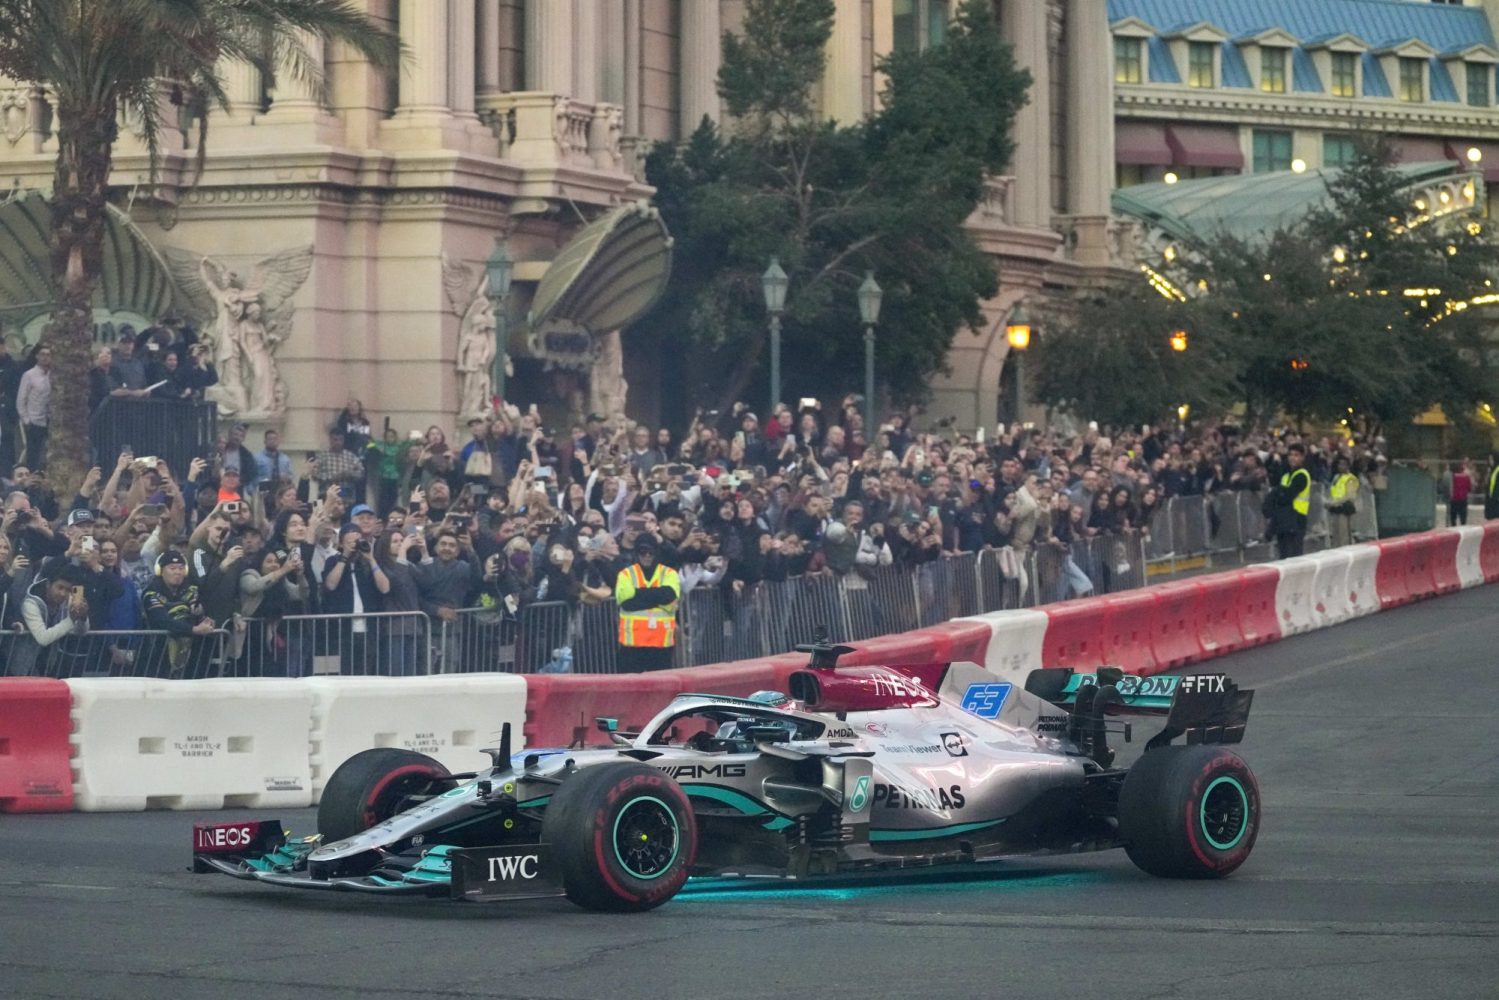 How to Get Last Minute Tickets to the F1 Grand Prix in Las Vegas